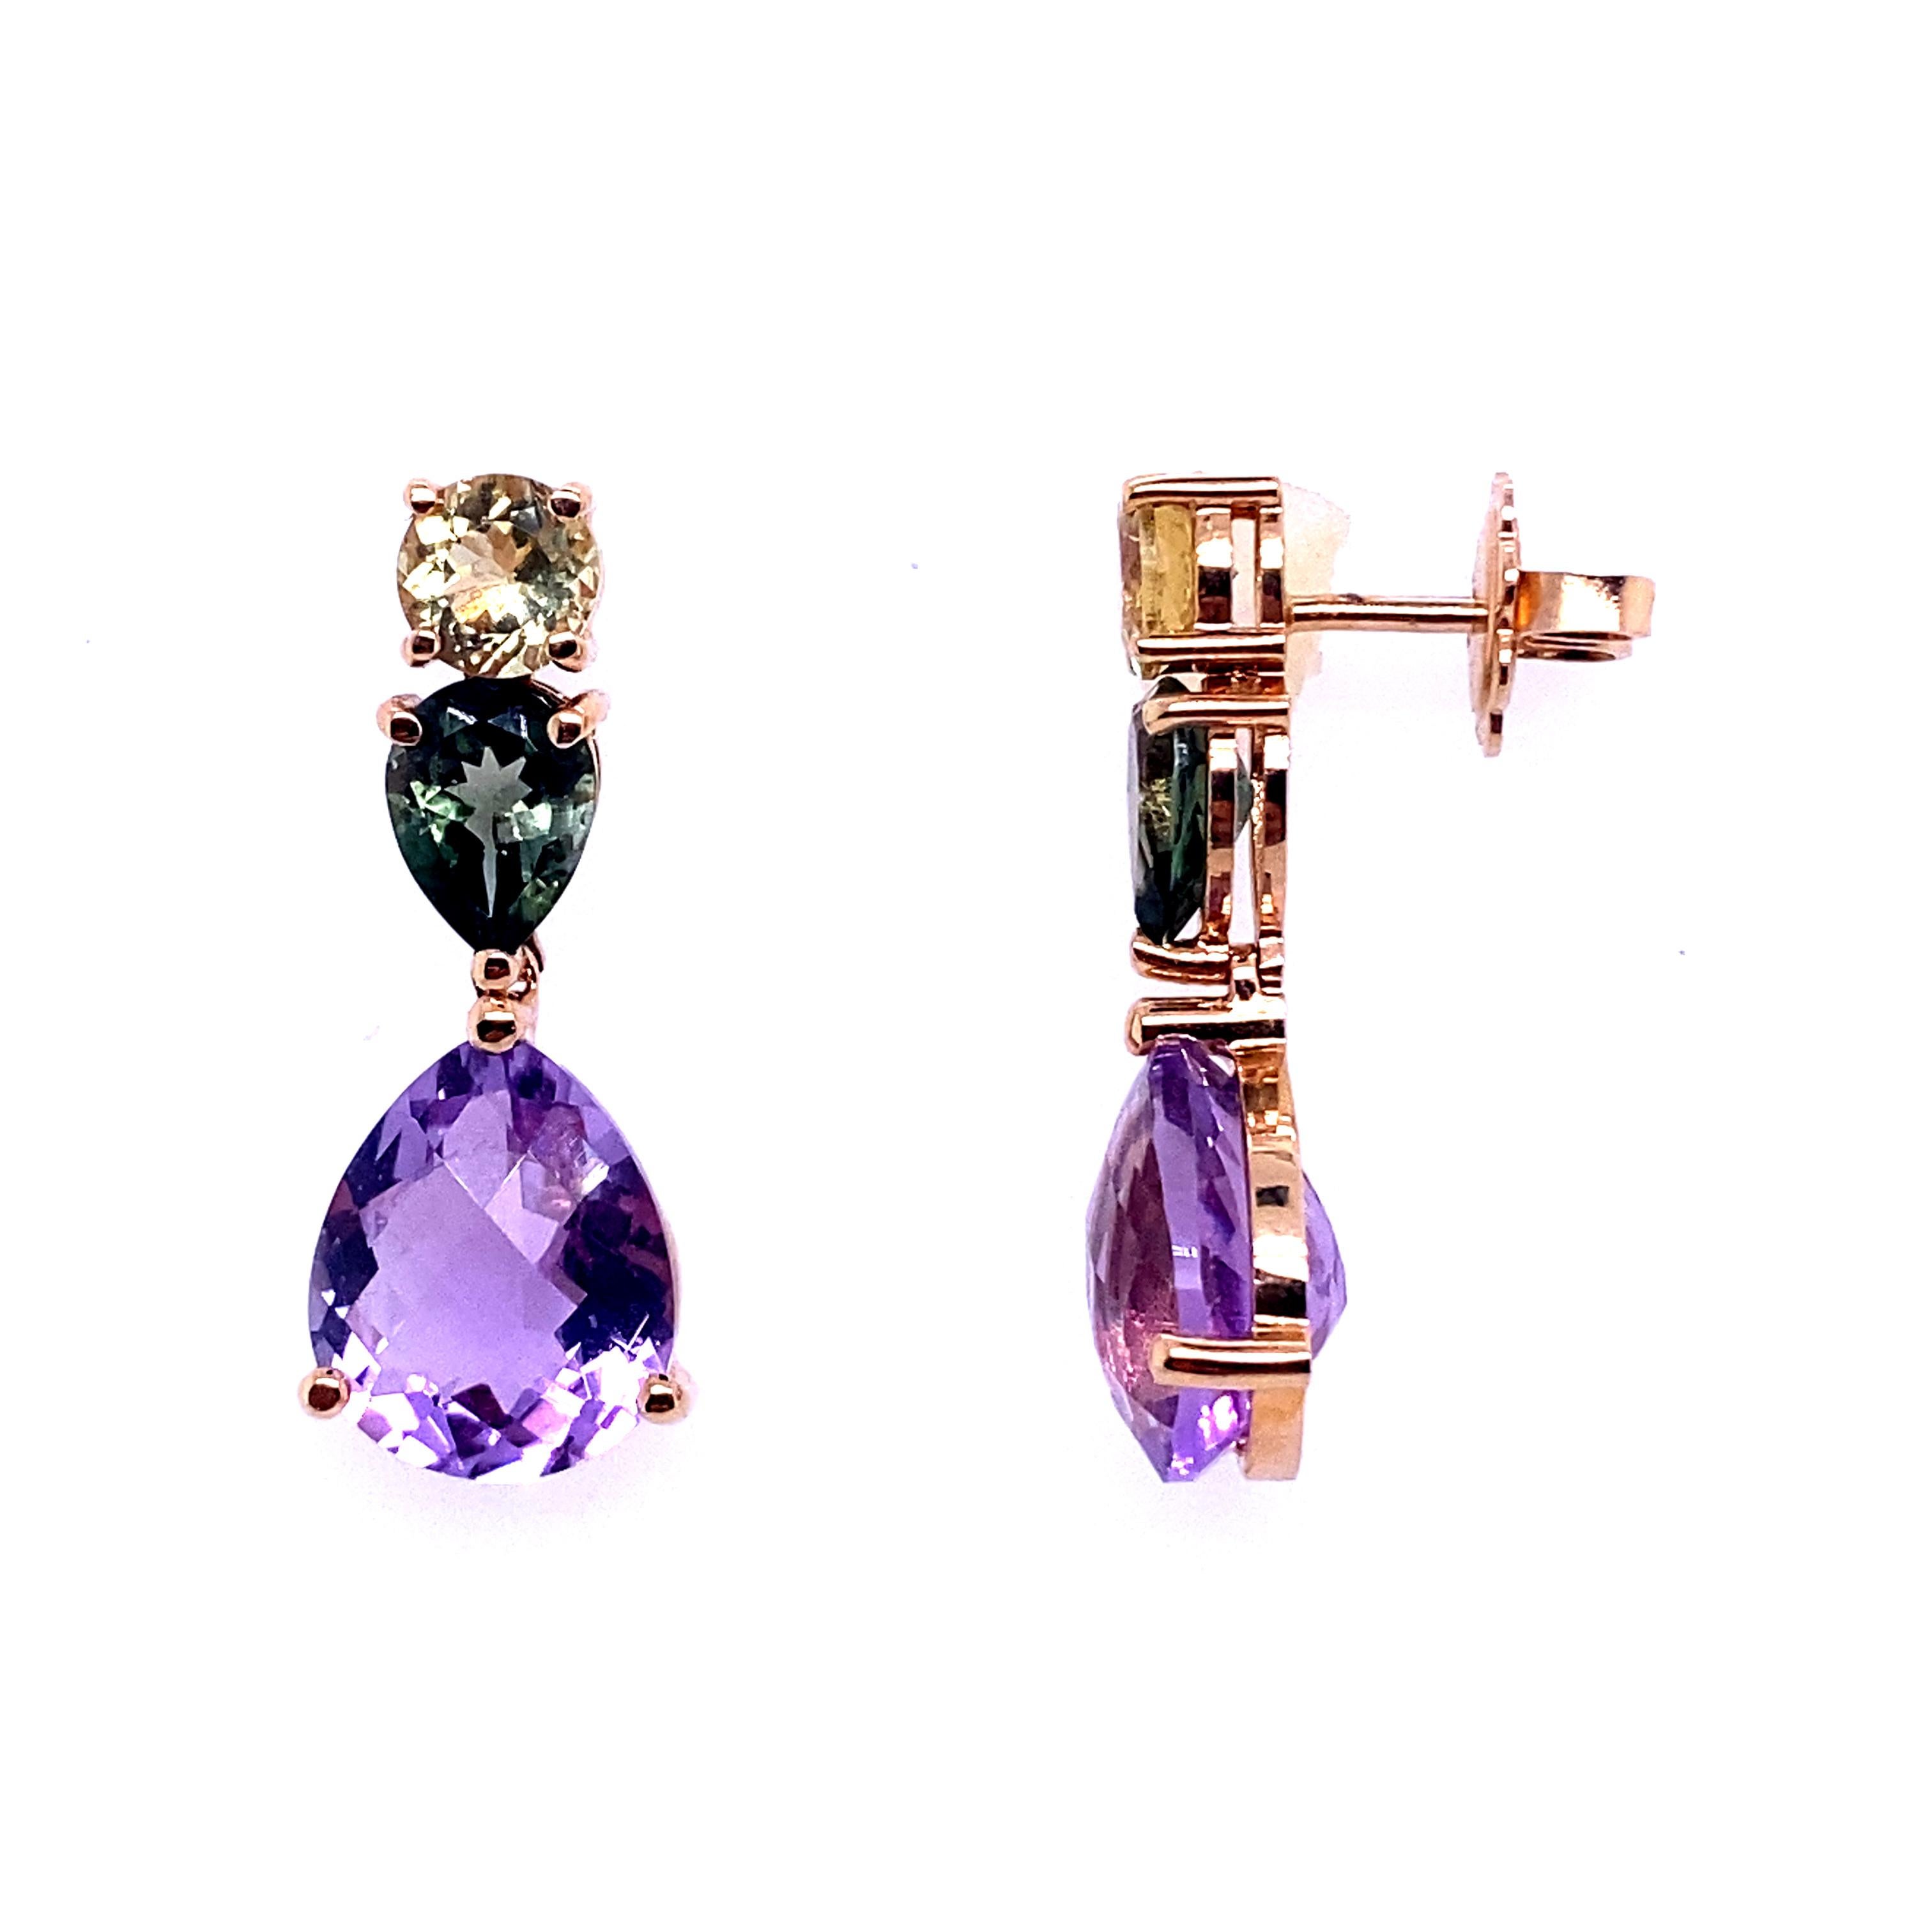 French Rose Gold Earrings Accompanied by a Amethyst, Citrine and Tourmaline For Sale 2